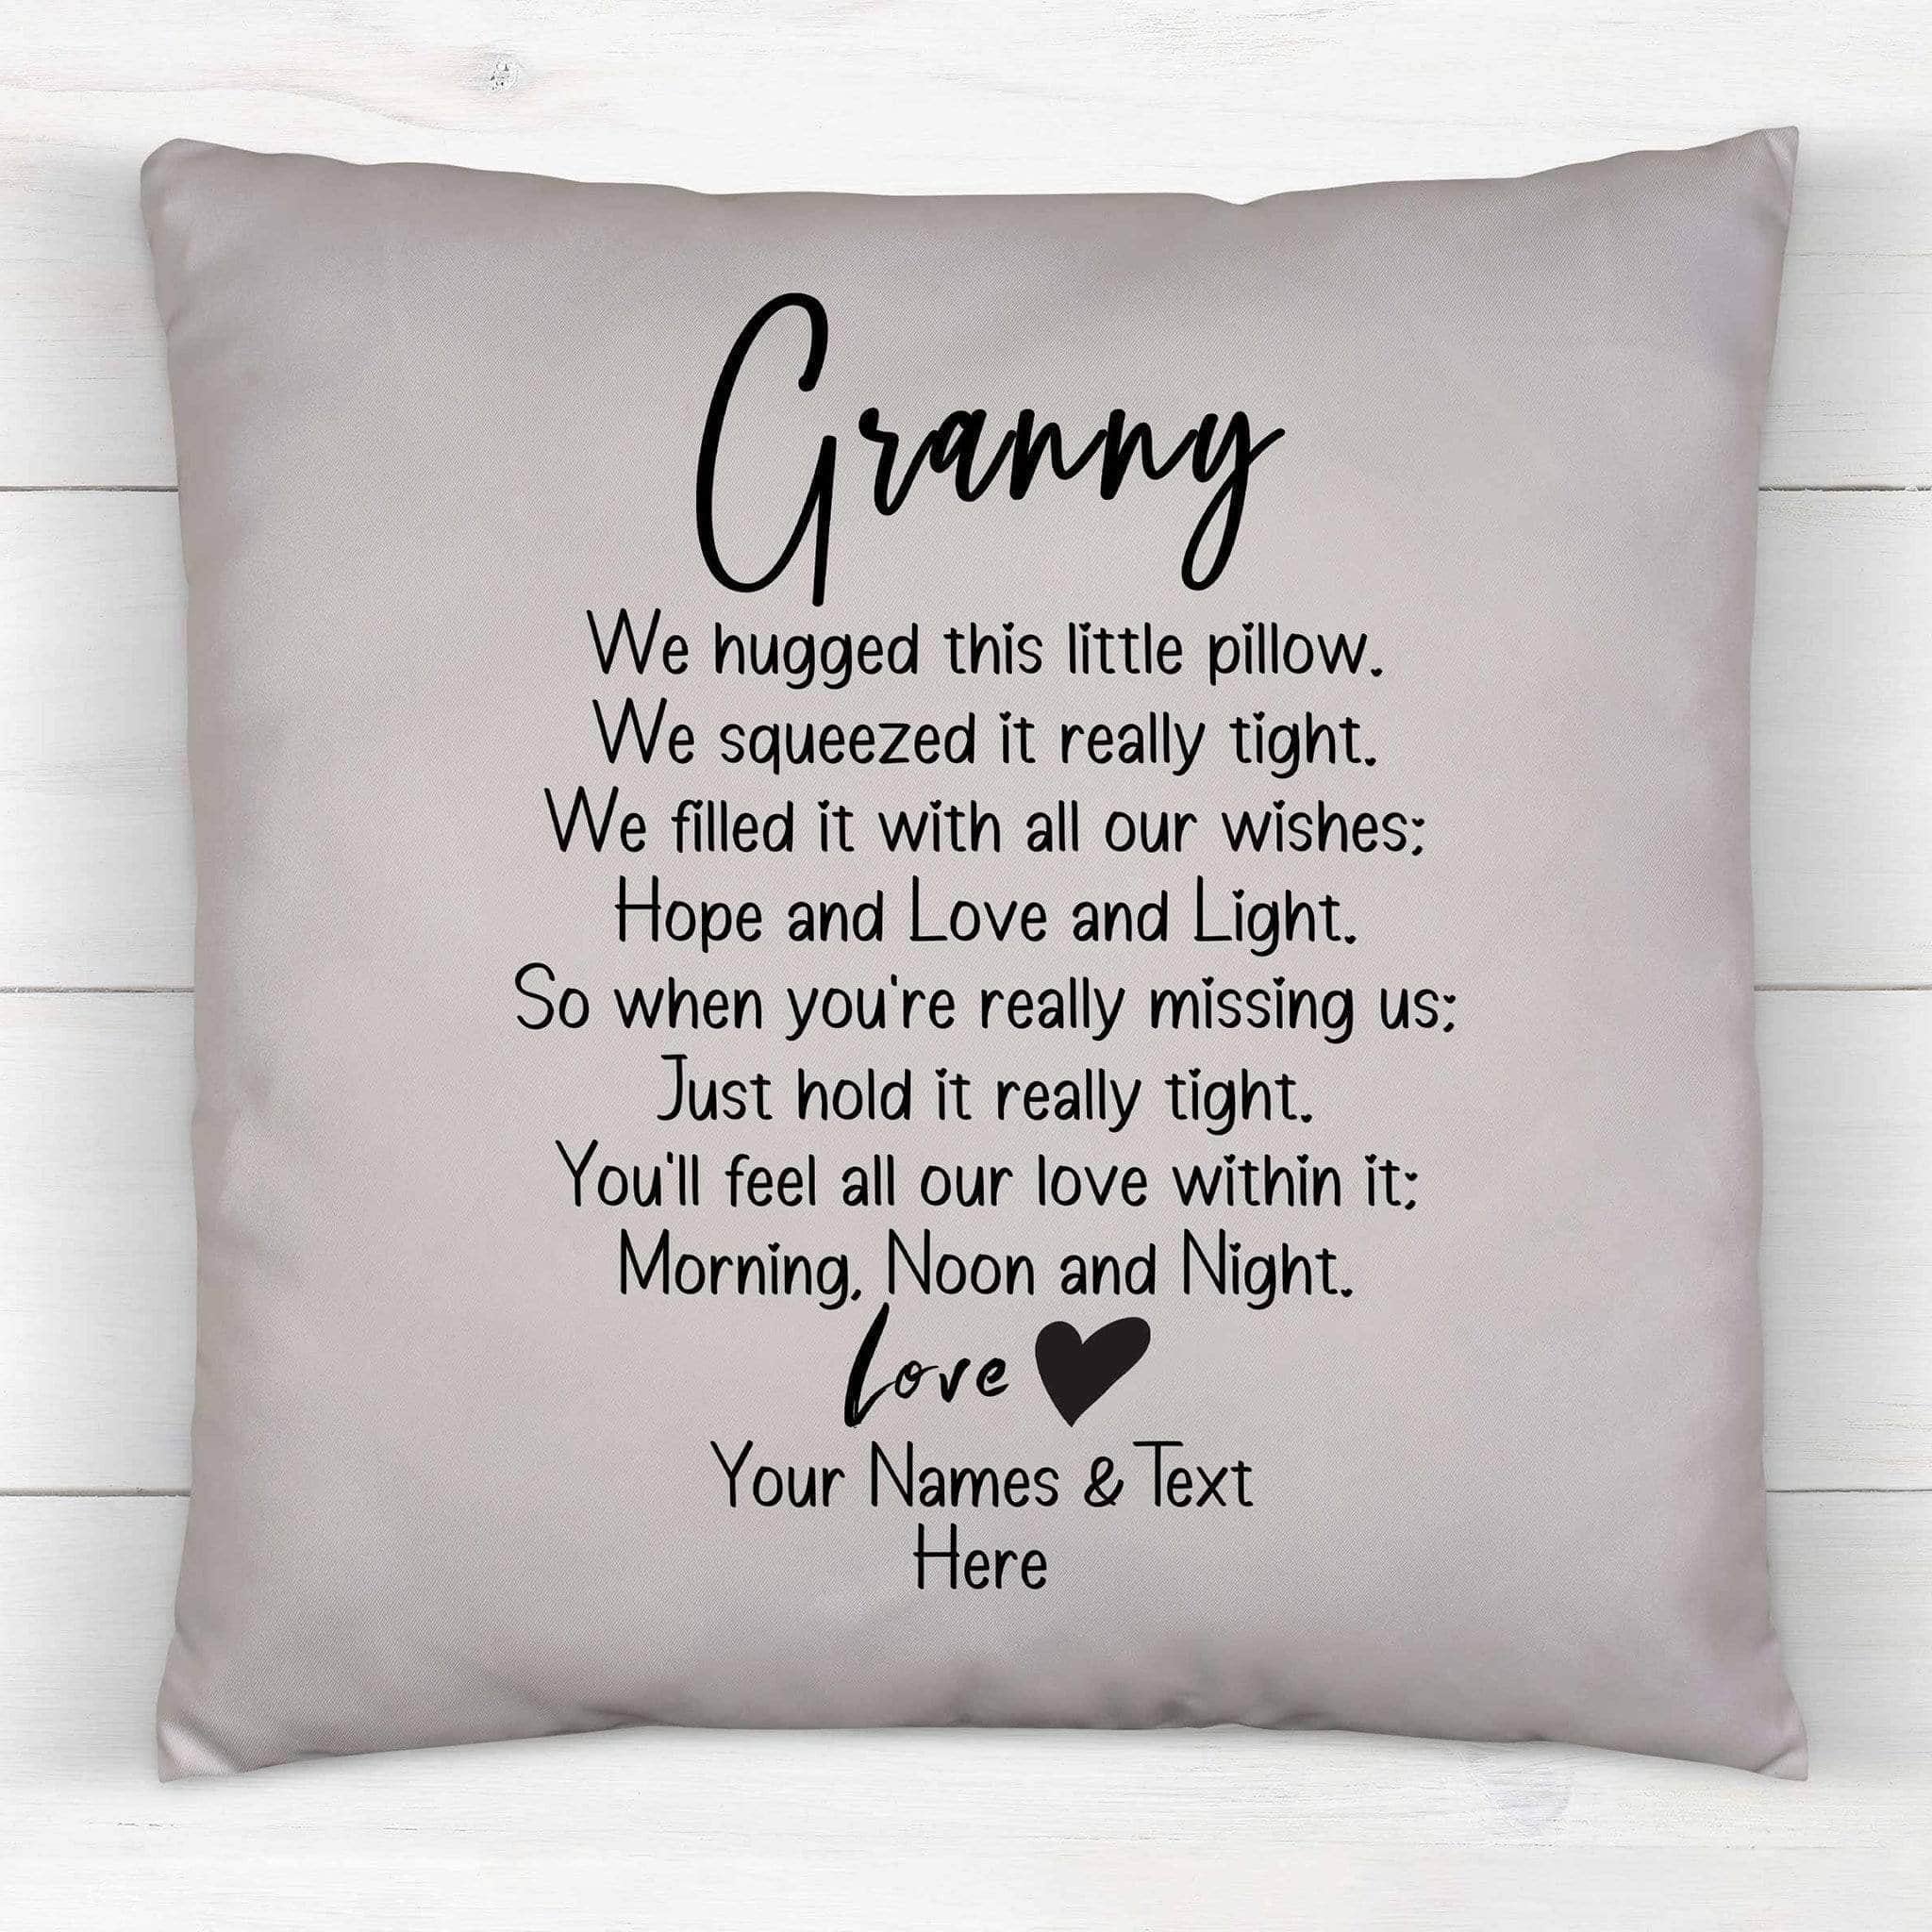 Granny We Hugged This Little Pillow Poem v2 Personalized Throw PillowCustomly Gifts